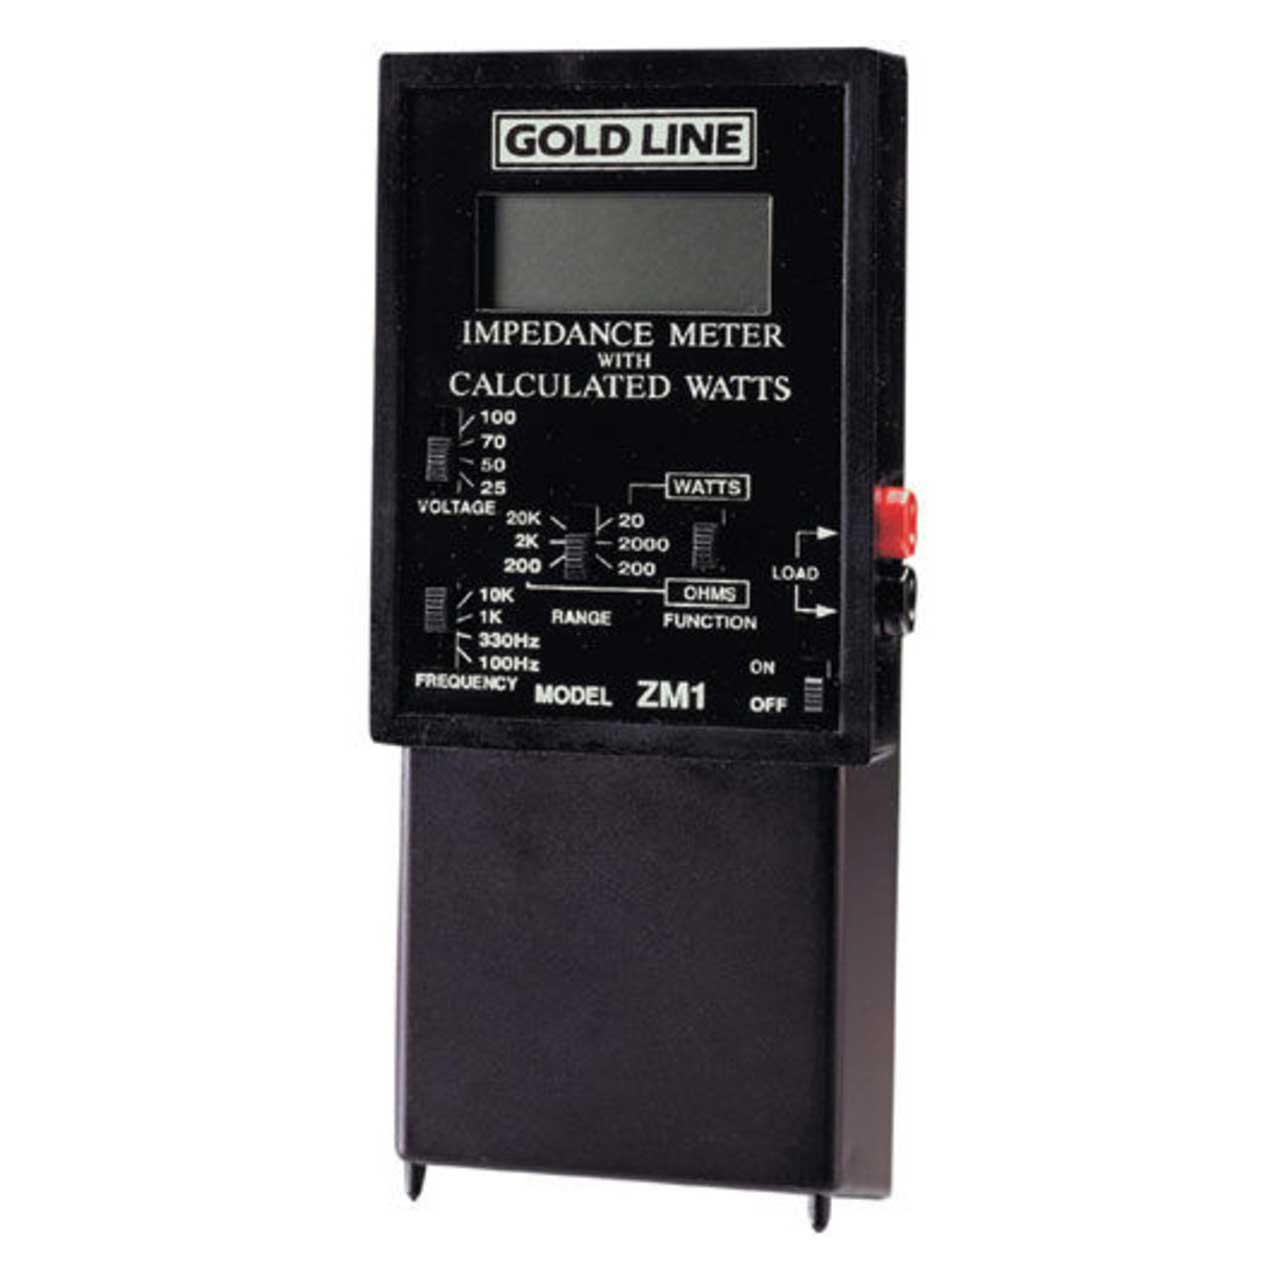 Gold Line ZM1 Portable Battery Operated Impedence Meter for 25 / 50 / 70 / 100 Volt Line Systems GLDL-ZM-1